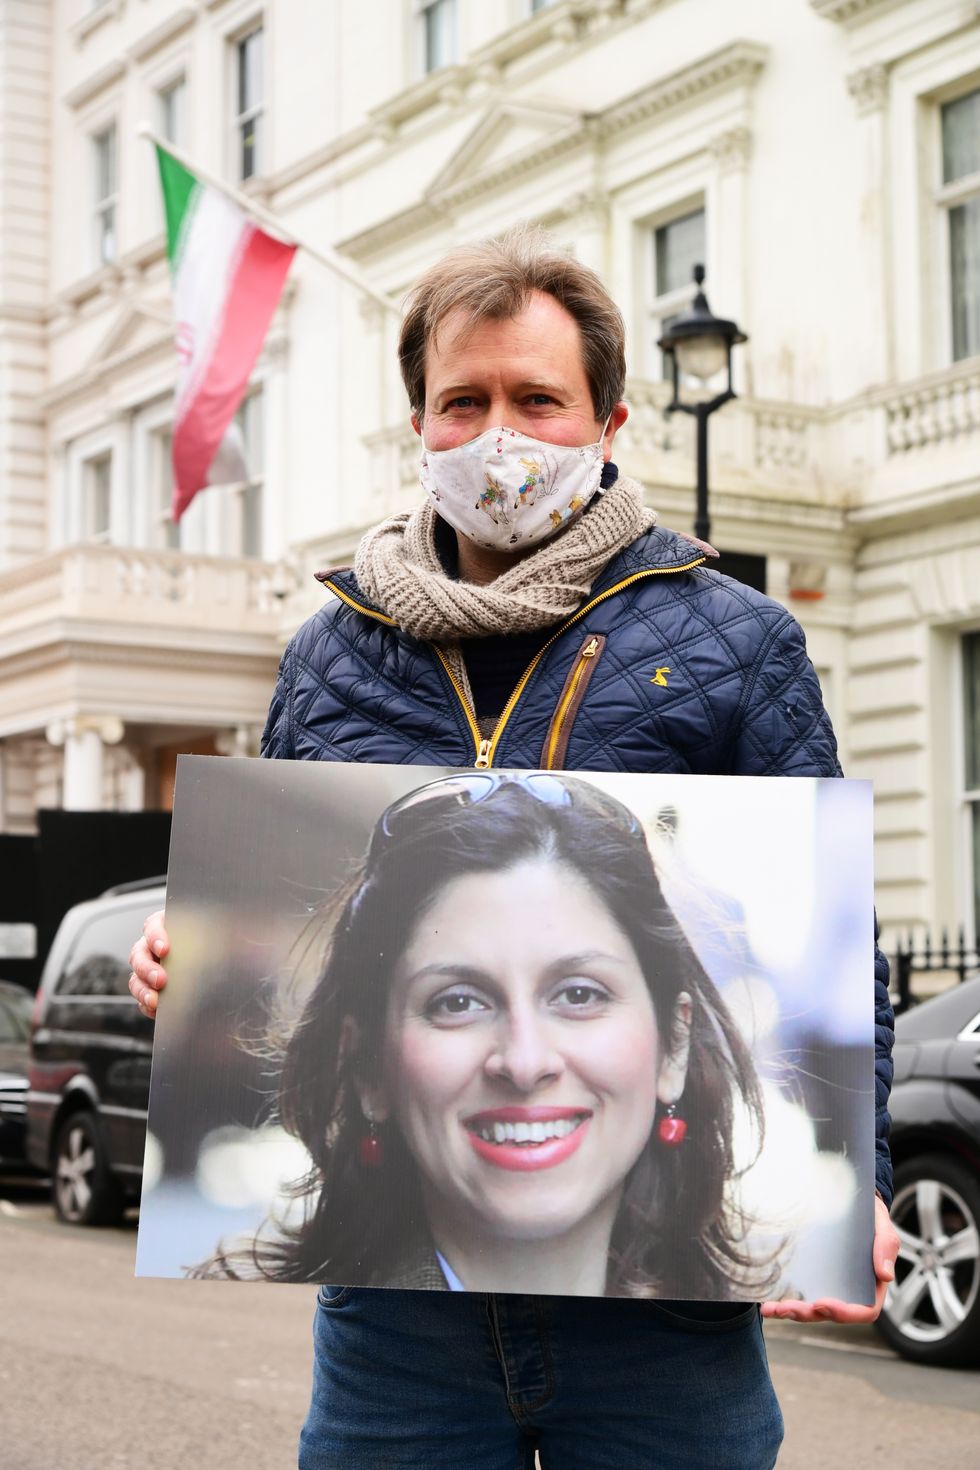 Richard Ratcliffe, the husband of Nazanin Zaghari-Ratcliffe, takes part in a protest outside the Iranian Embassy in London.